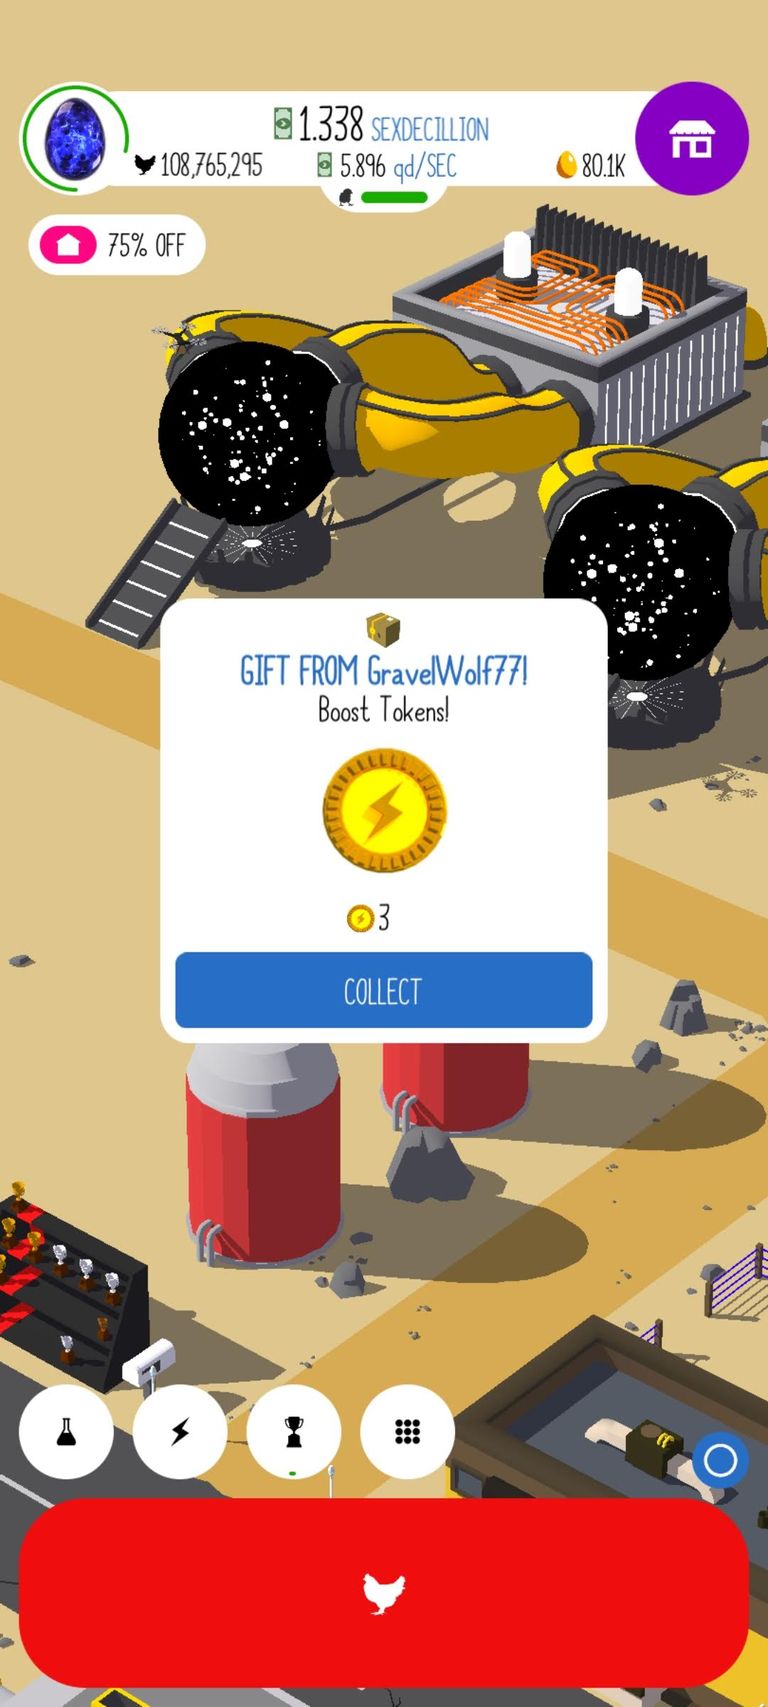 Egg Inc Bug: Gifts are still there after the contract is completed